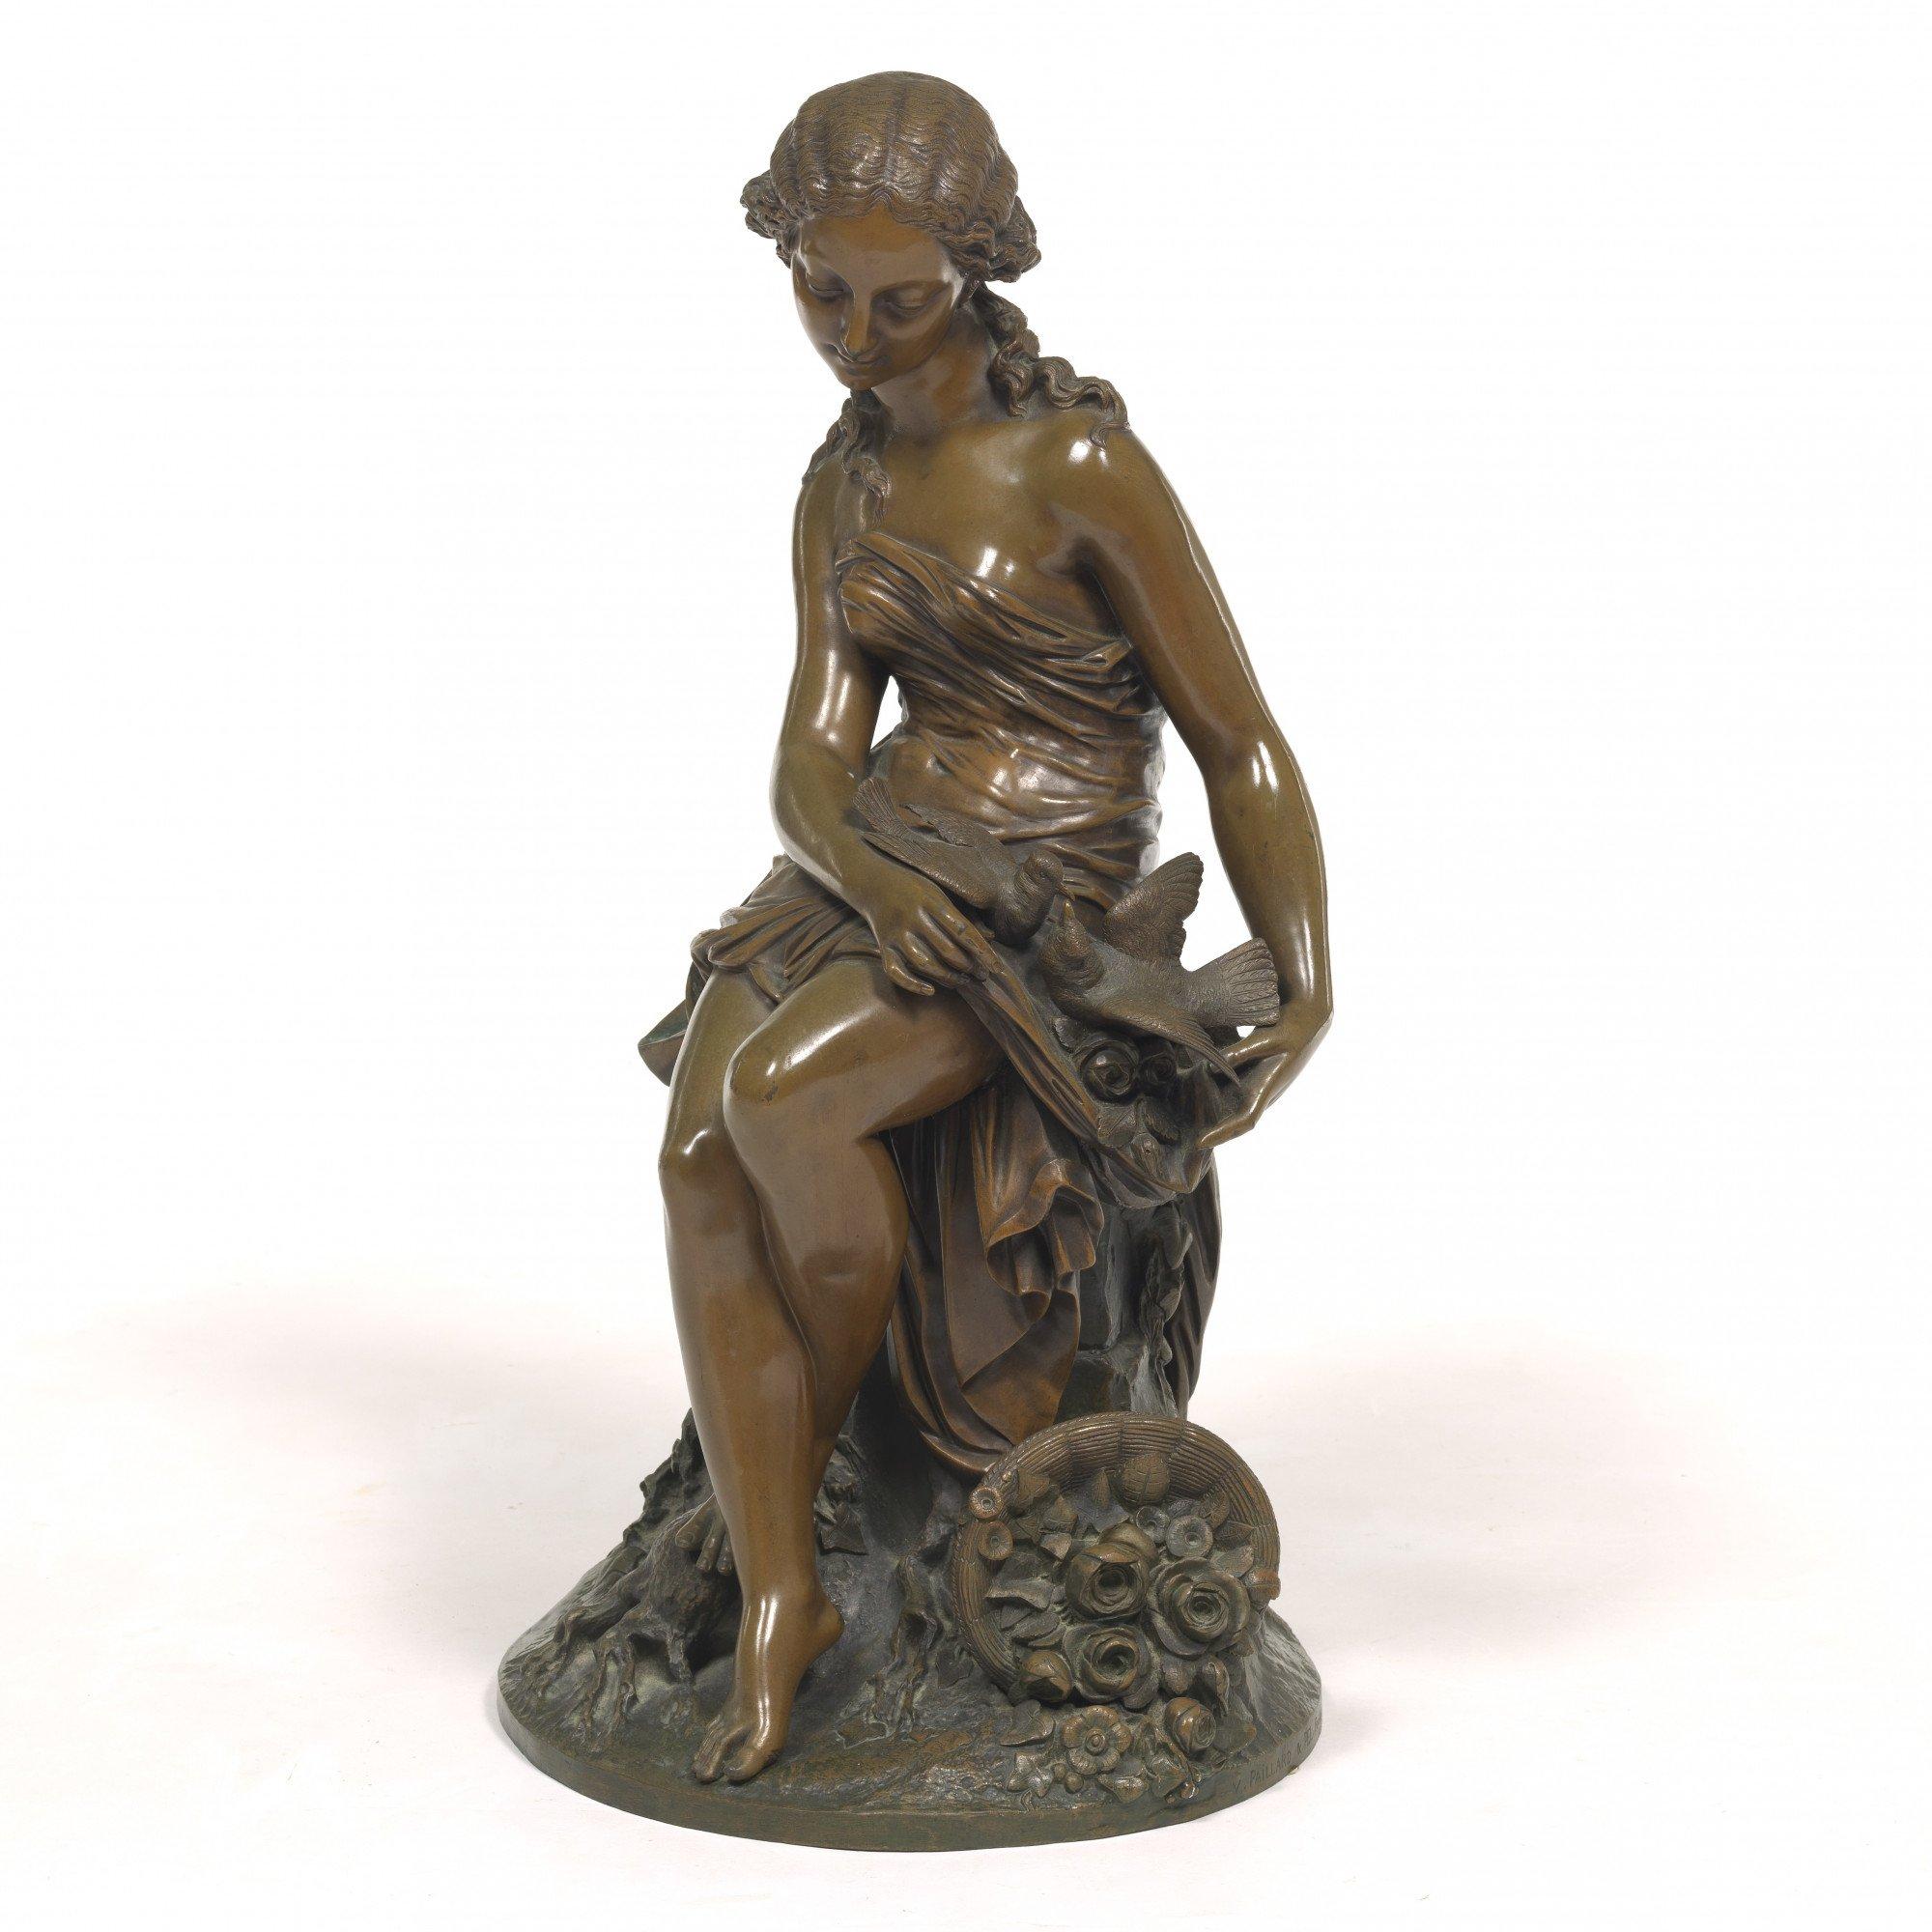 Isidore Romain Boitel Figurative Sculpture - Young girl with doves and basket of flowers, 19th century French bronze 